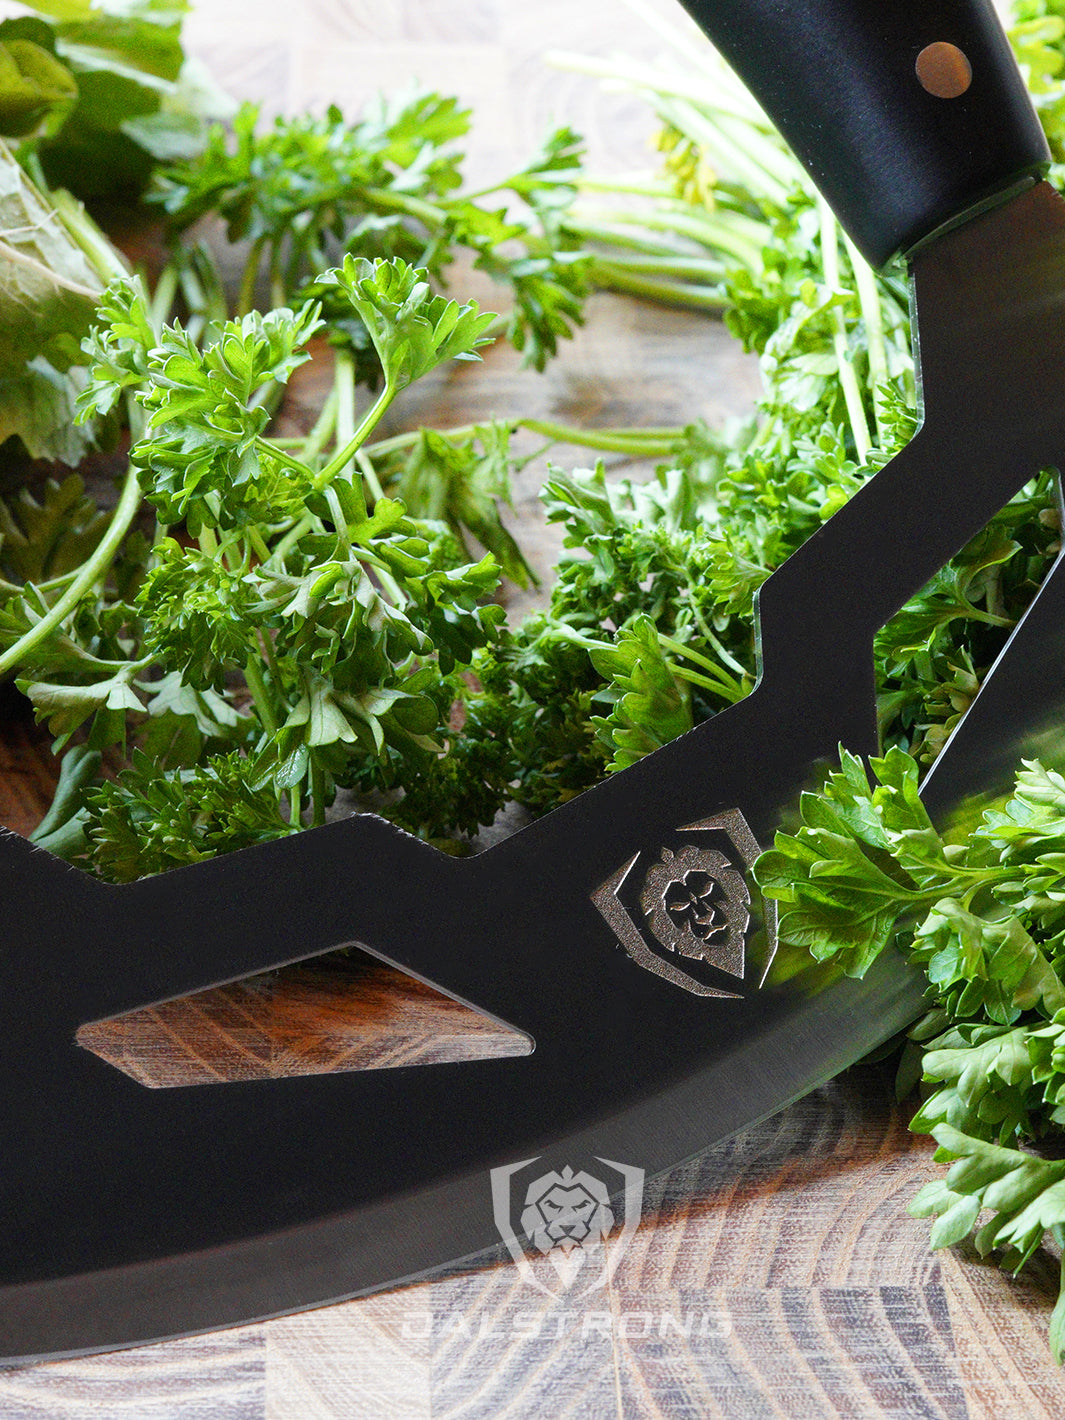 Dalstrong gladiator series 8.5 inch mezzaluna knife with black handle and parsley beside it.